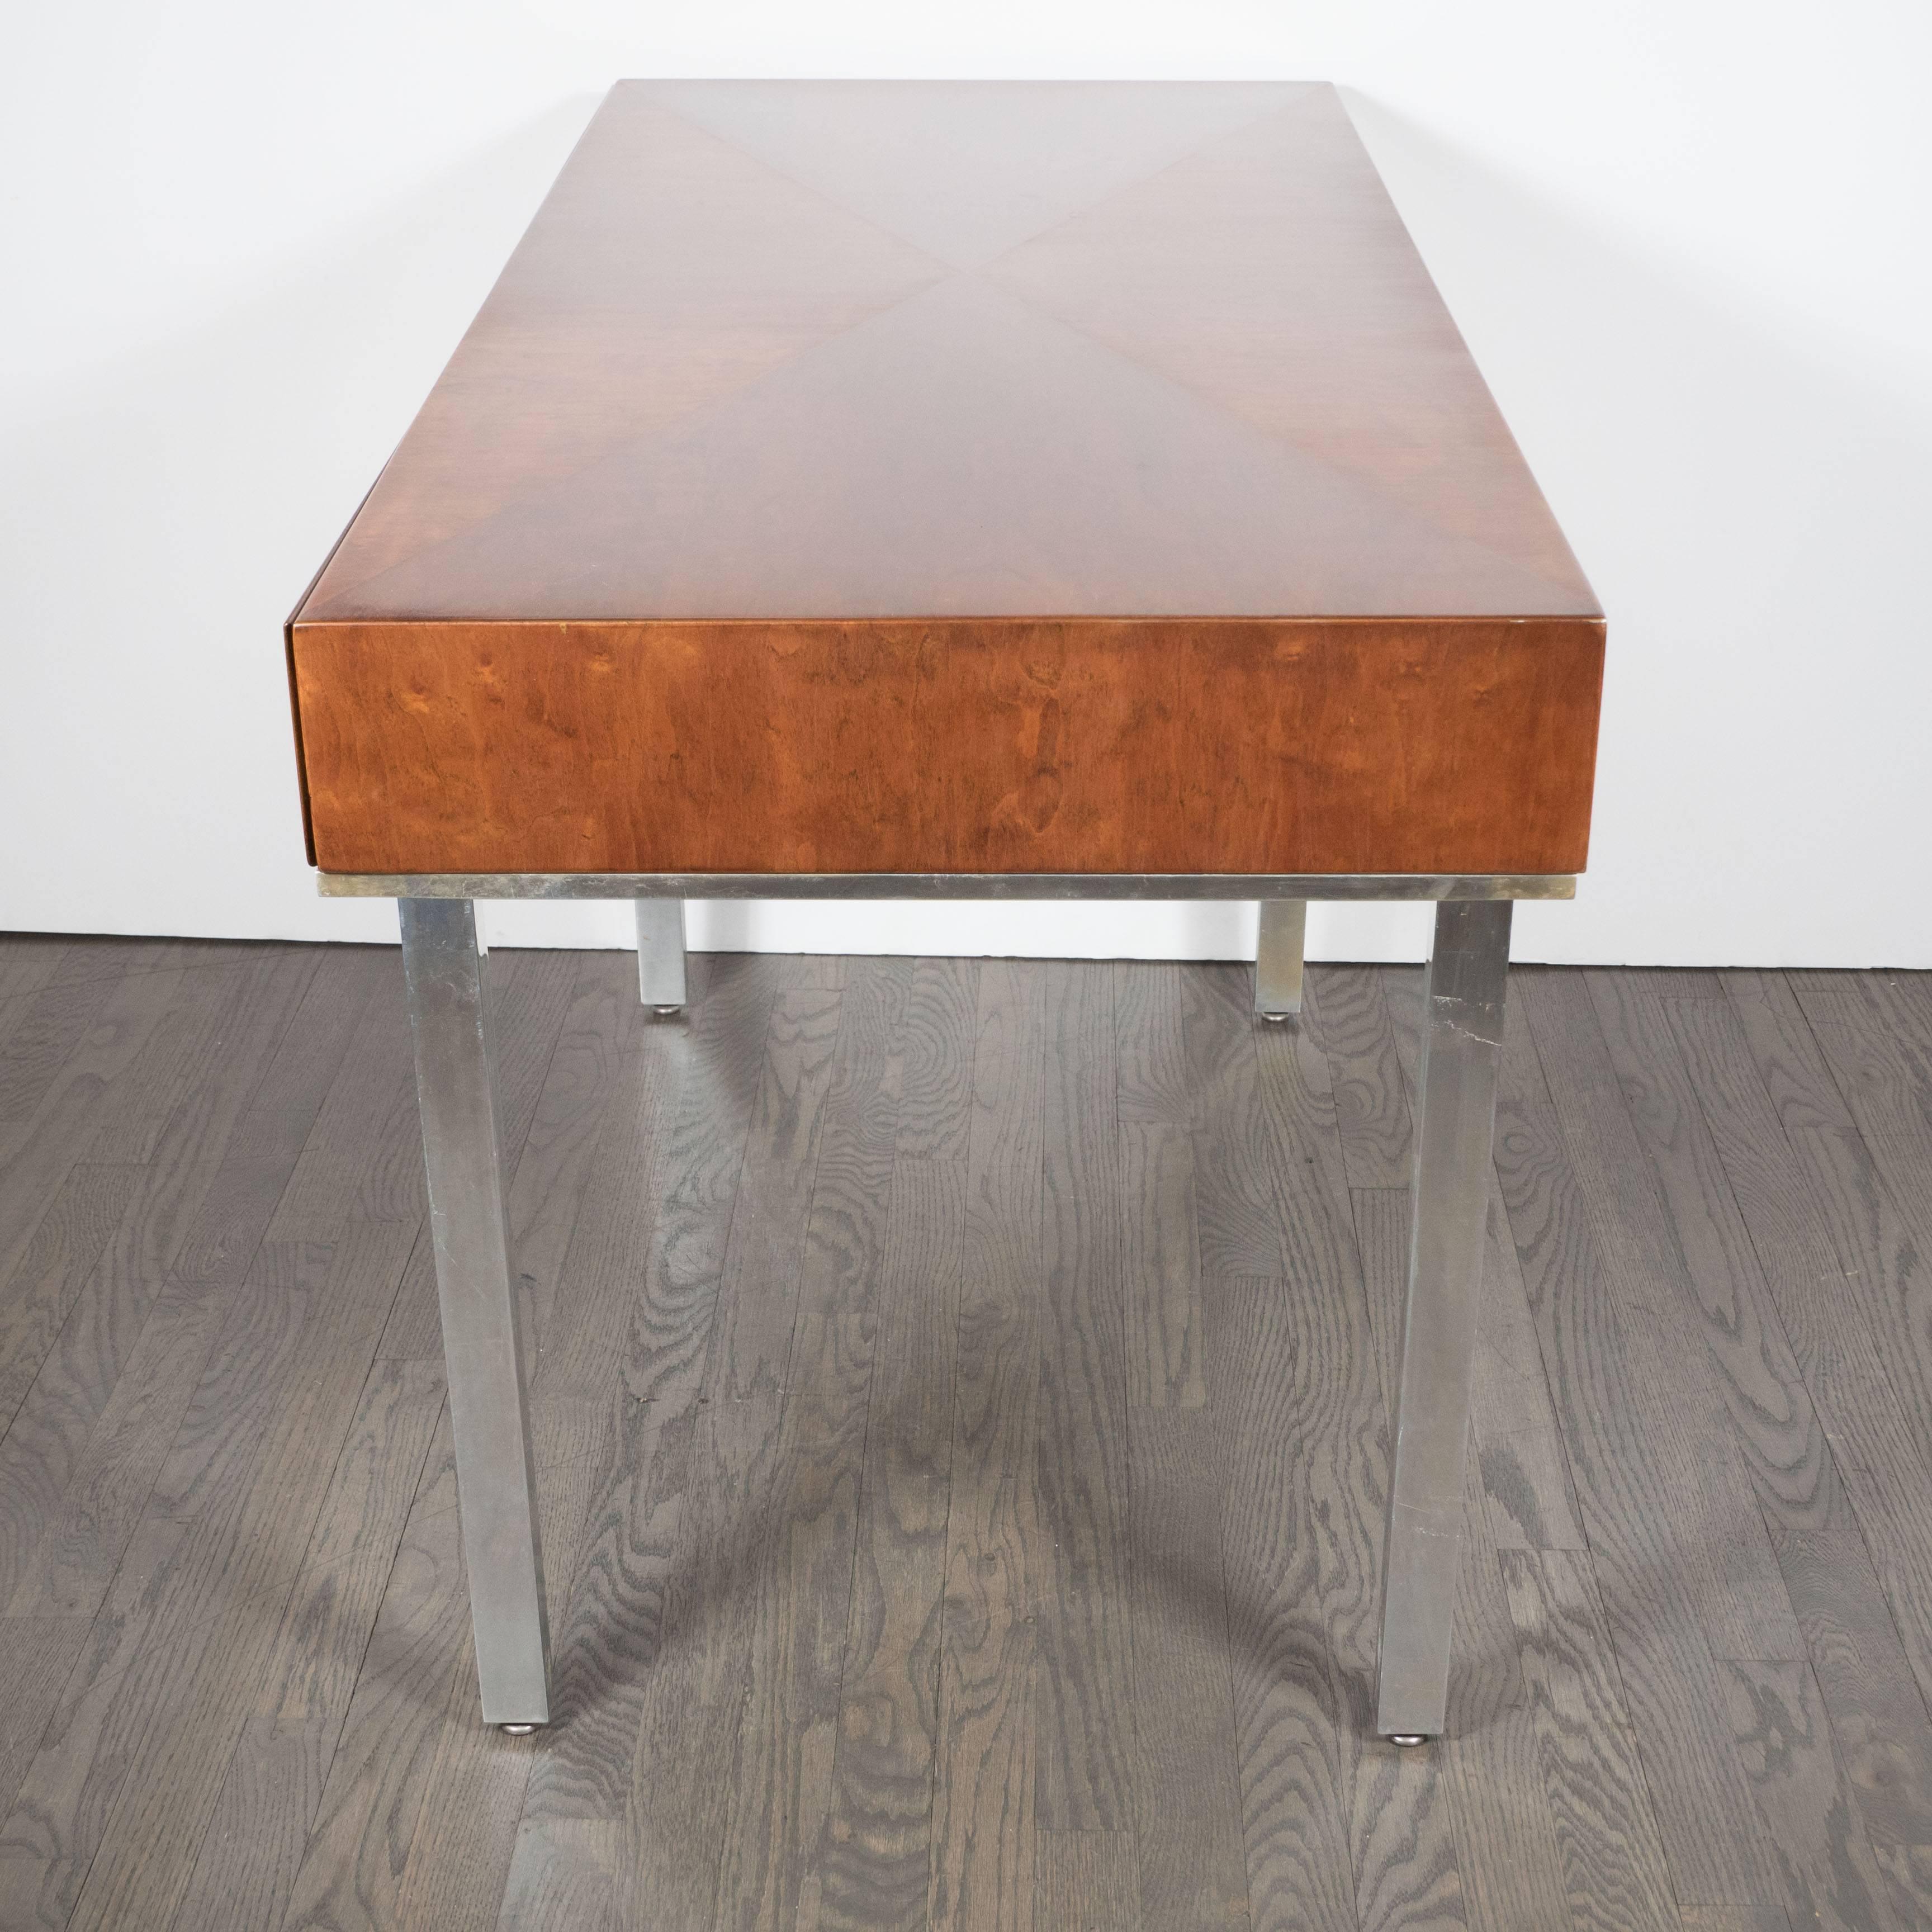 Mid-Century Modern Desk in Polished Aluminum and Bookmatched Walnut, American  1